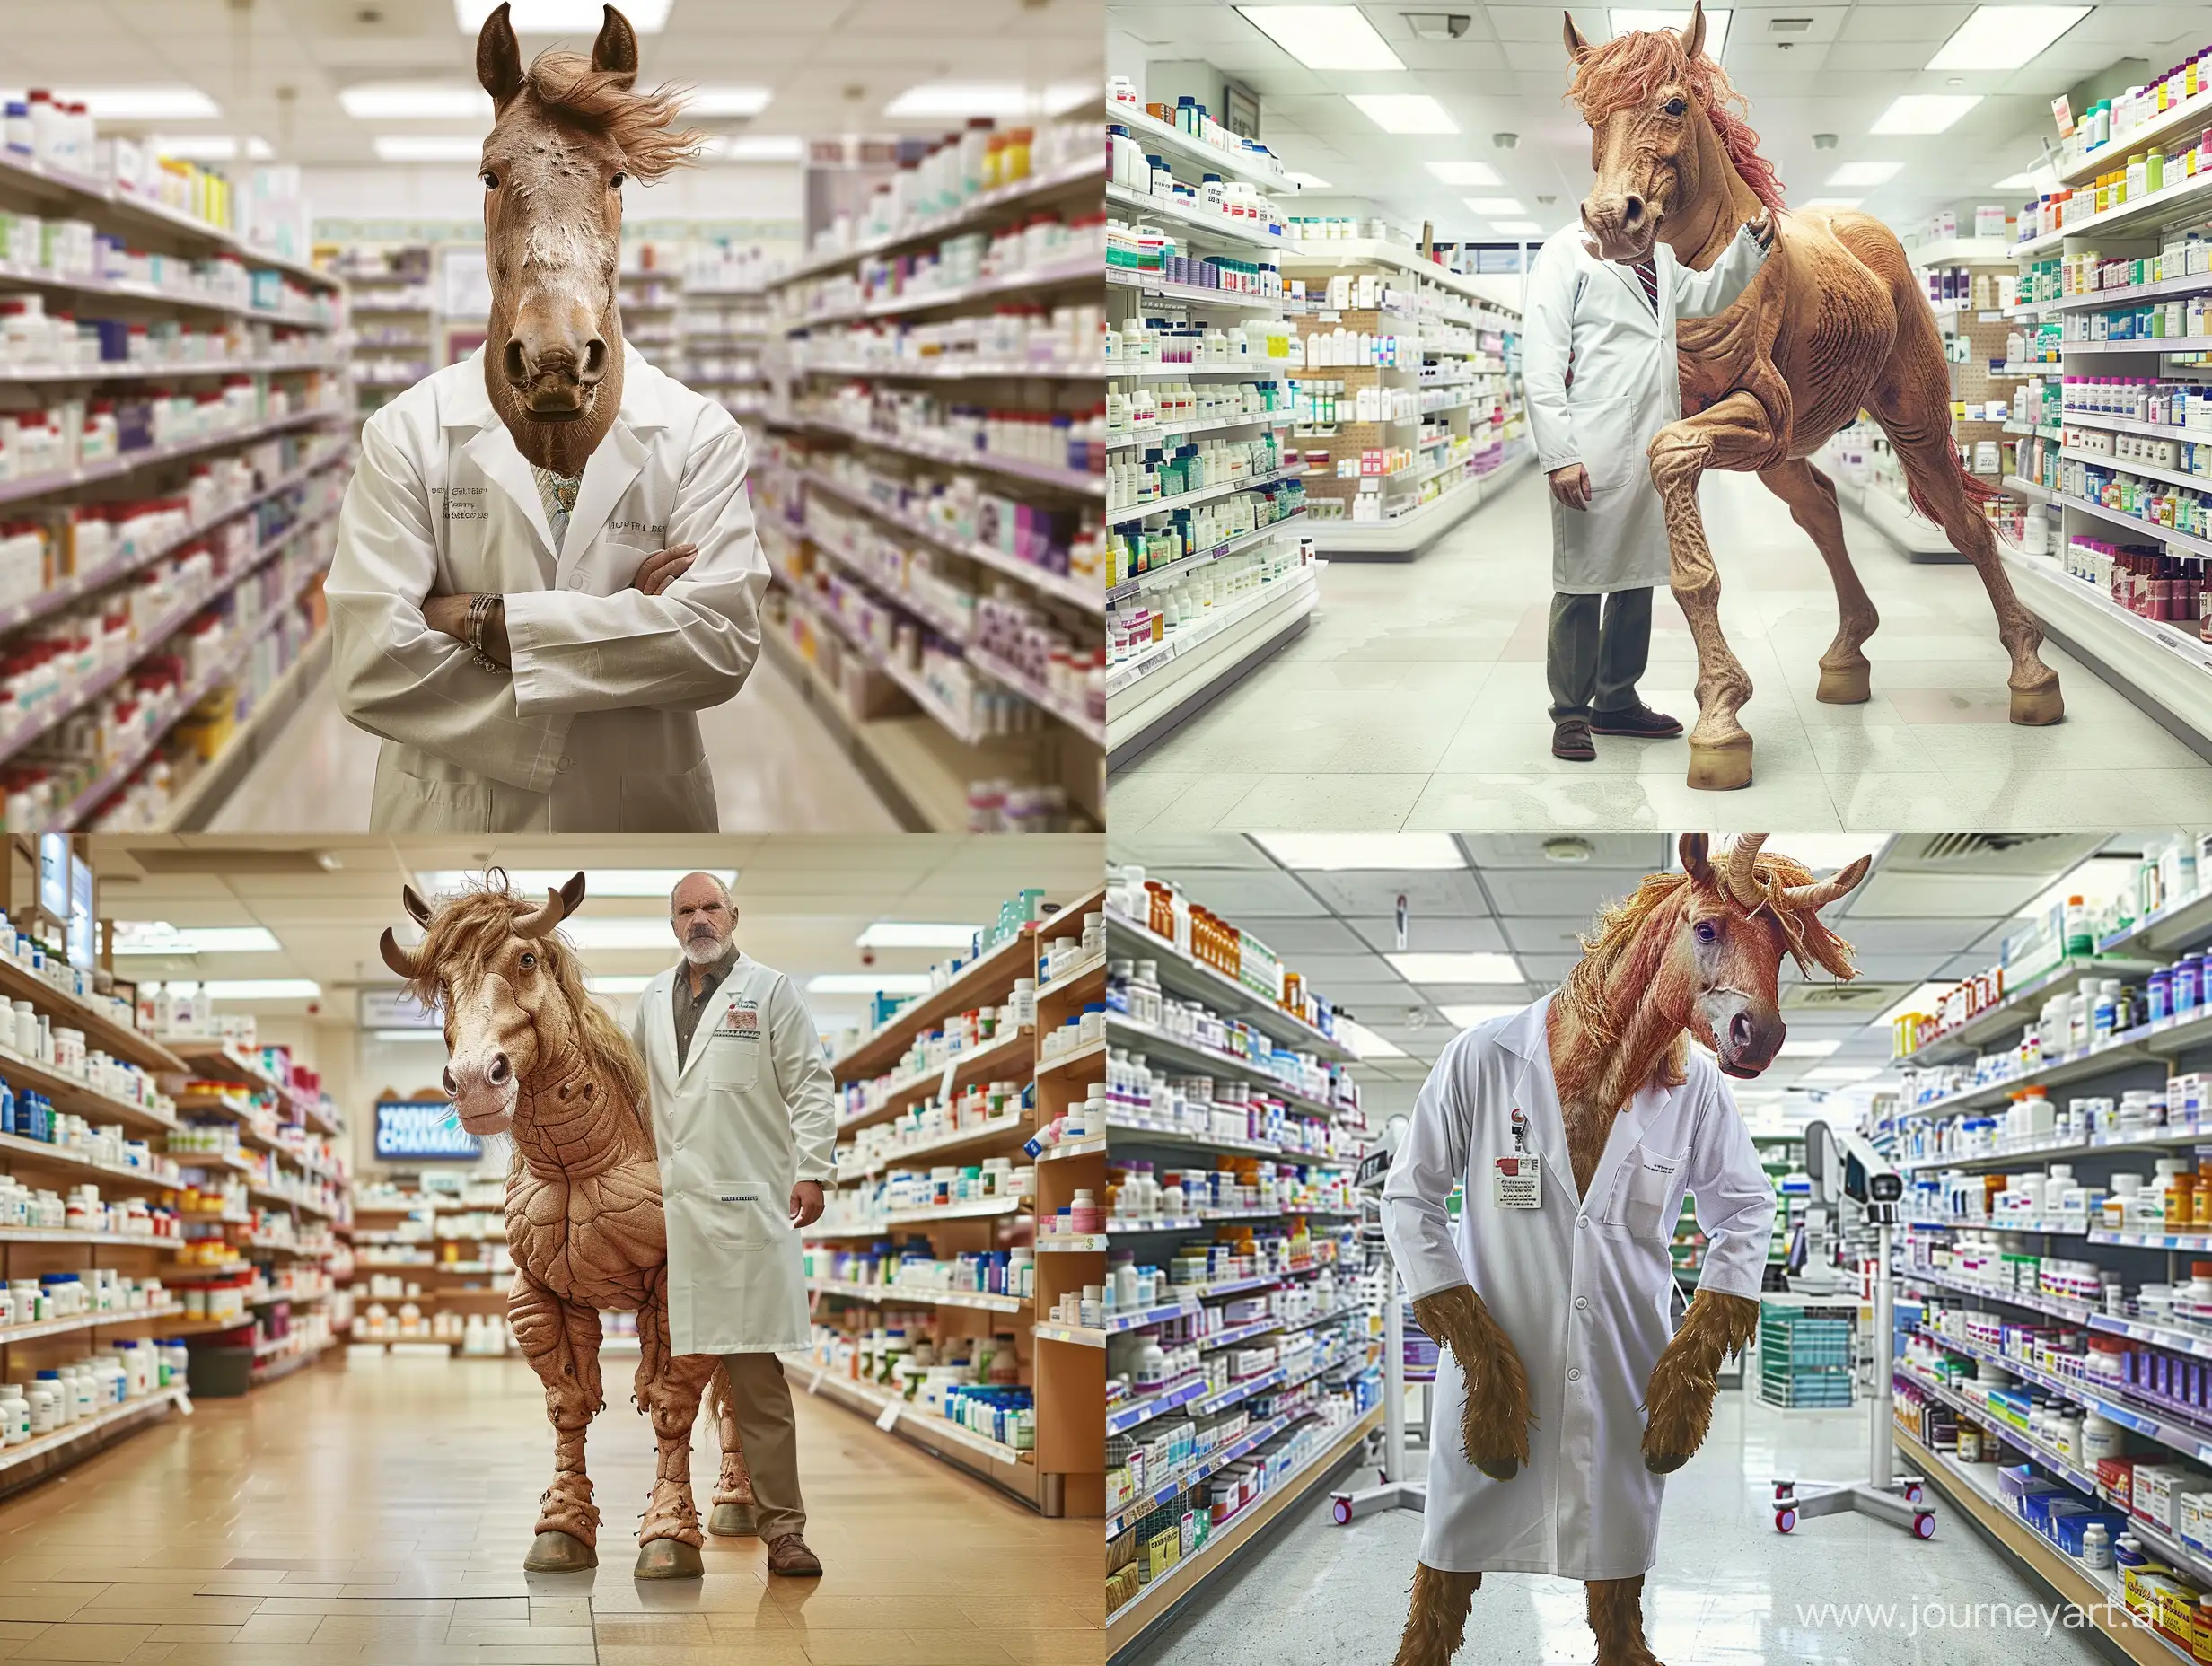 A centaur with the Body of a horse and the Torso of a caucasian man in a labcoat in a 21st Century retail pharmacy high Definition highly detailed. Highly realistic photography. Body of a horse with 4 legs!!!